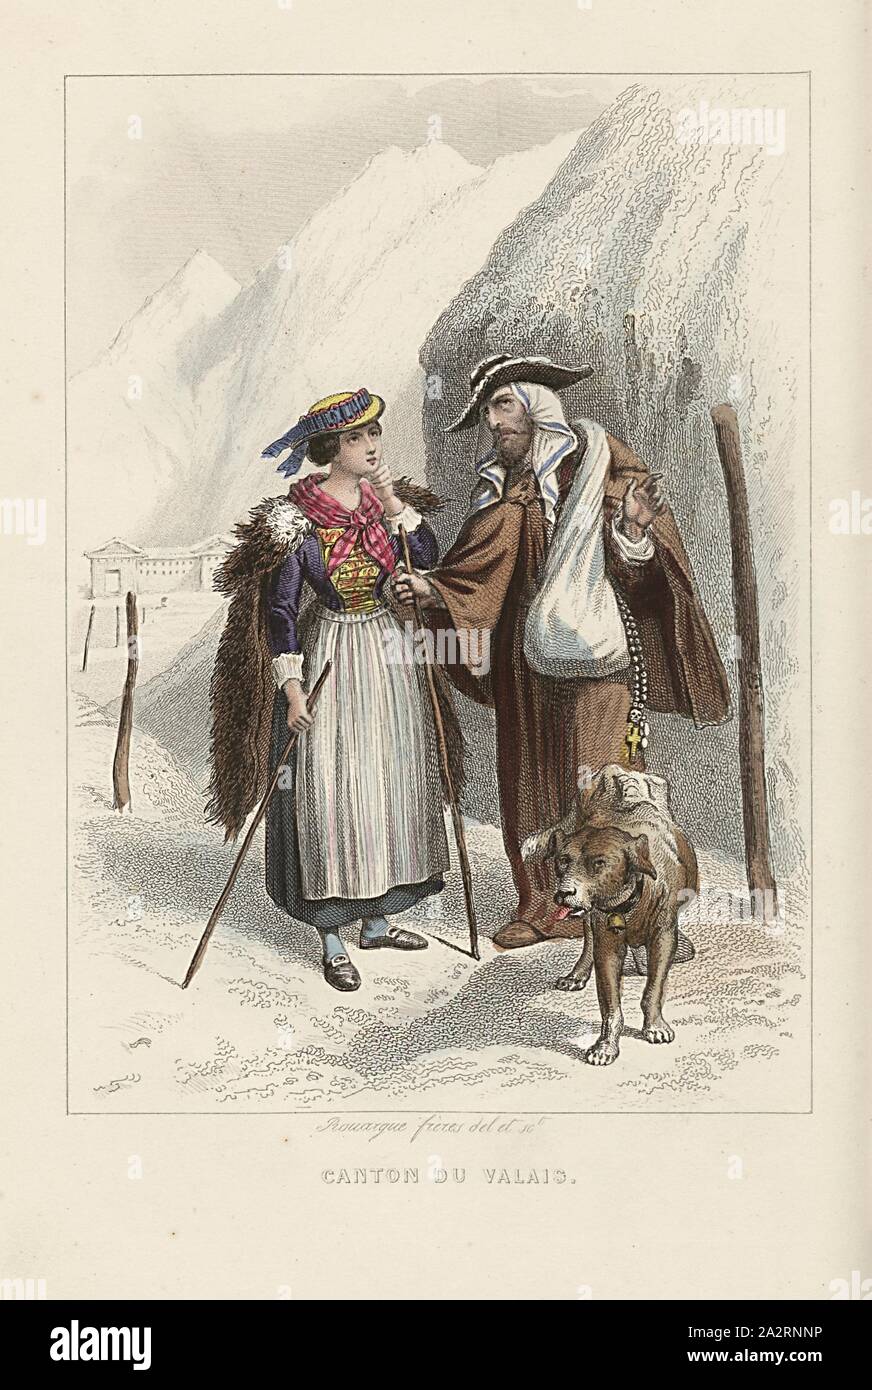 Canton of Valais, Woman in Valais costume and monk with a dog on the Great St. Bernard; Colored etching, to p. 142, Rouargue frères (del. et sc.), Xavier Marmier: Voyage en Suisse. Paris: Morizot, [1861 Stock Photo